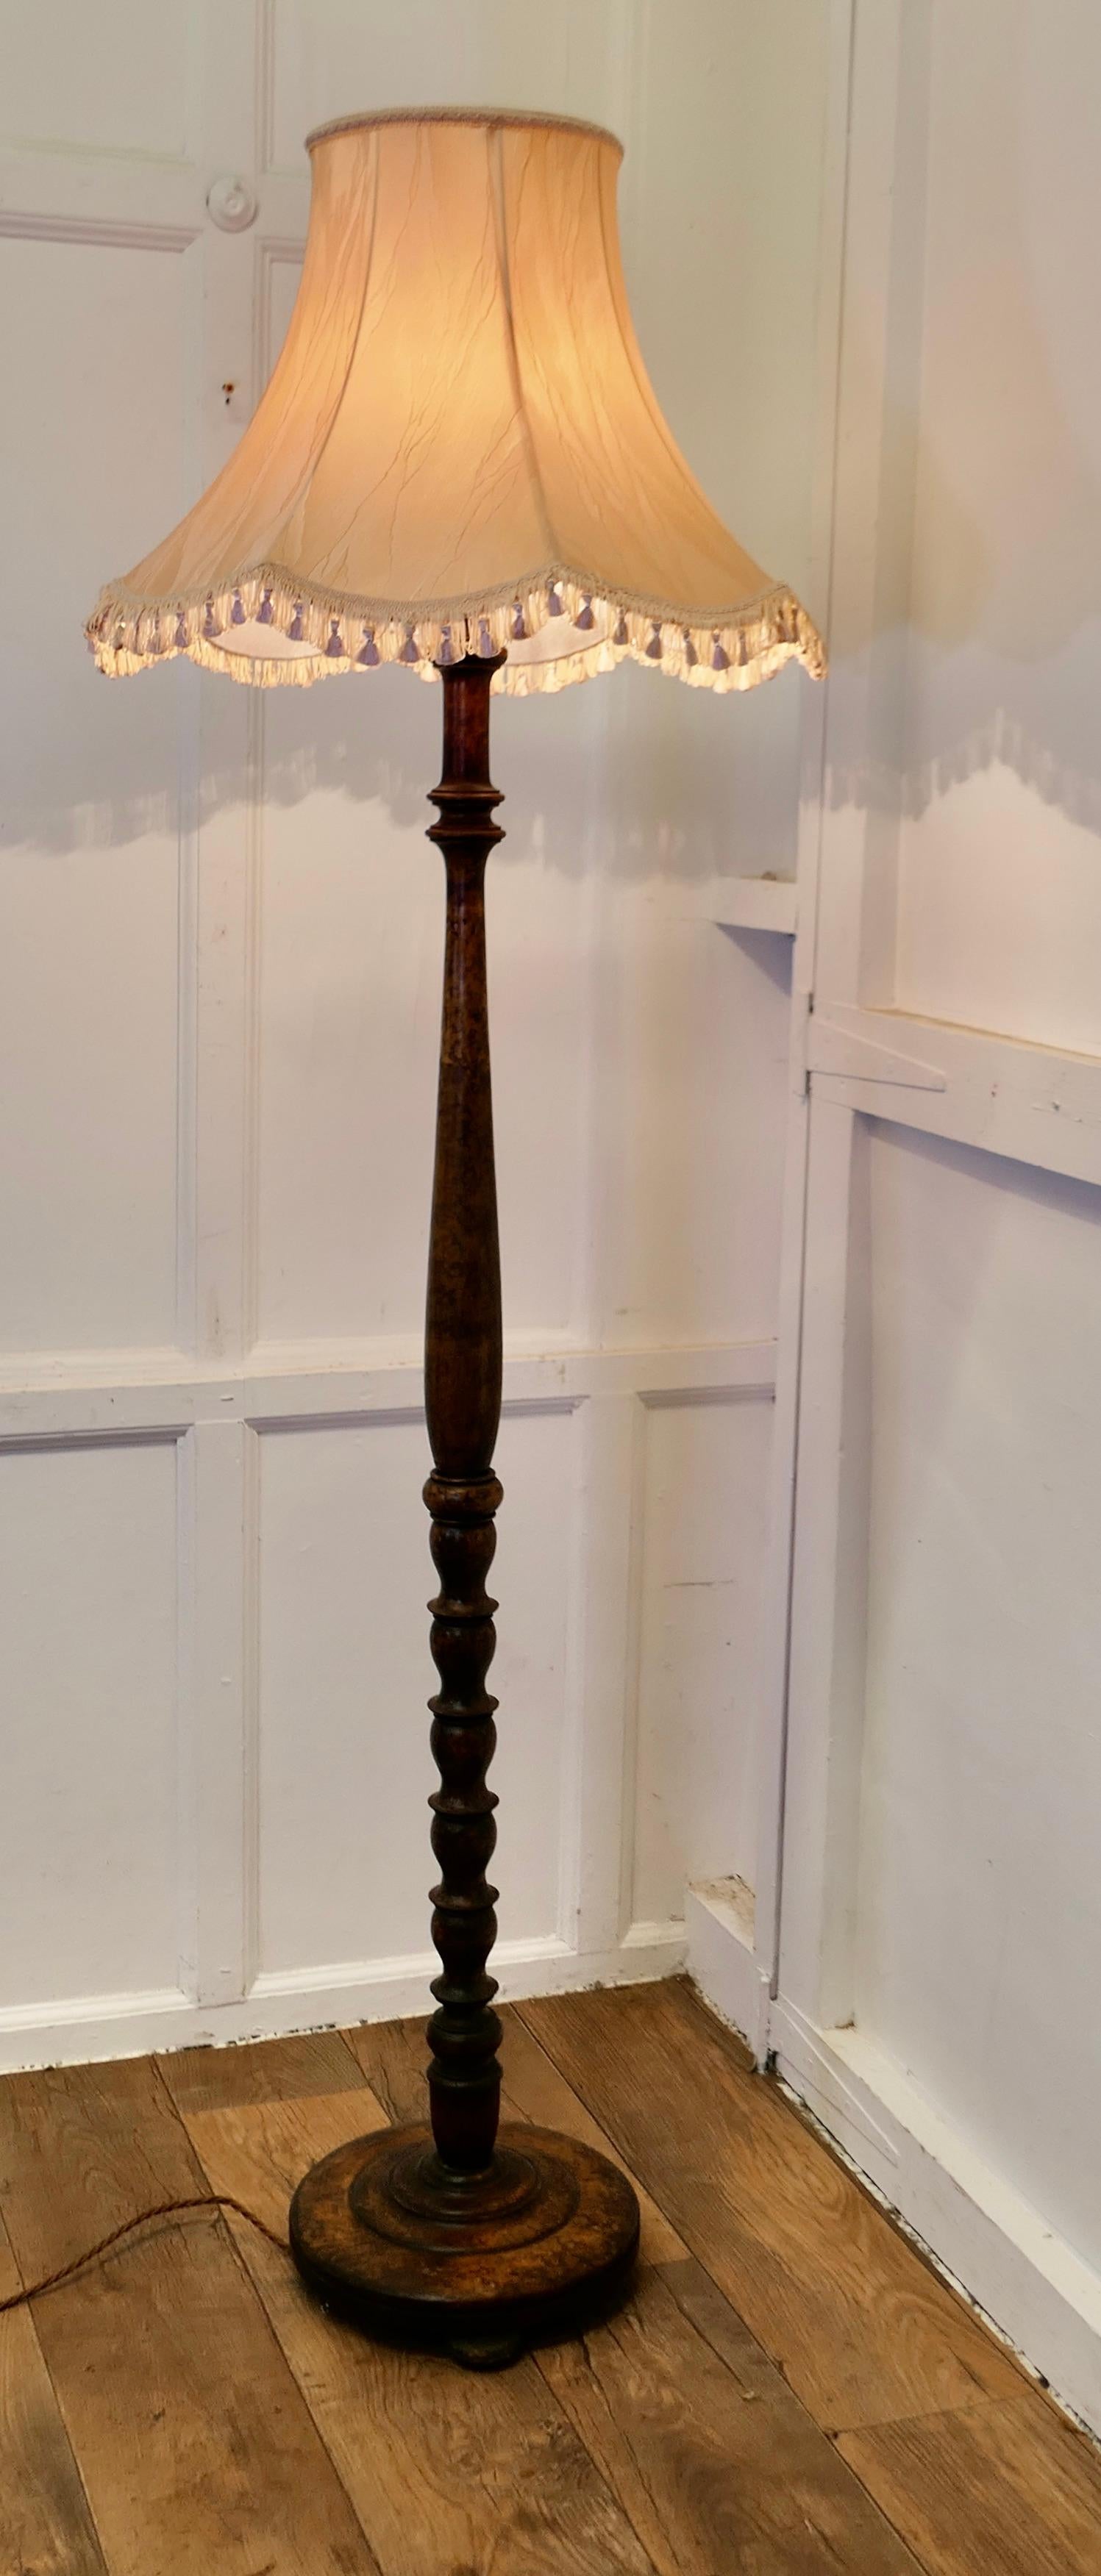 Art Deco Odeon Style Turned Burr Walnut Standard or Floor Lamp 

This is a very stylish piece, the lamp has a thick turned base and quite an elaborate turned upright column, the lamp is made in Burr Walnut a wood much prised for its dramatic